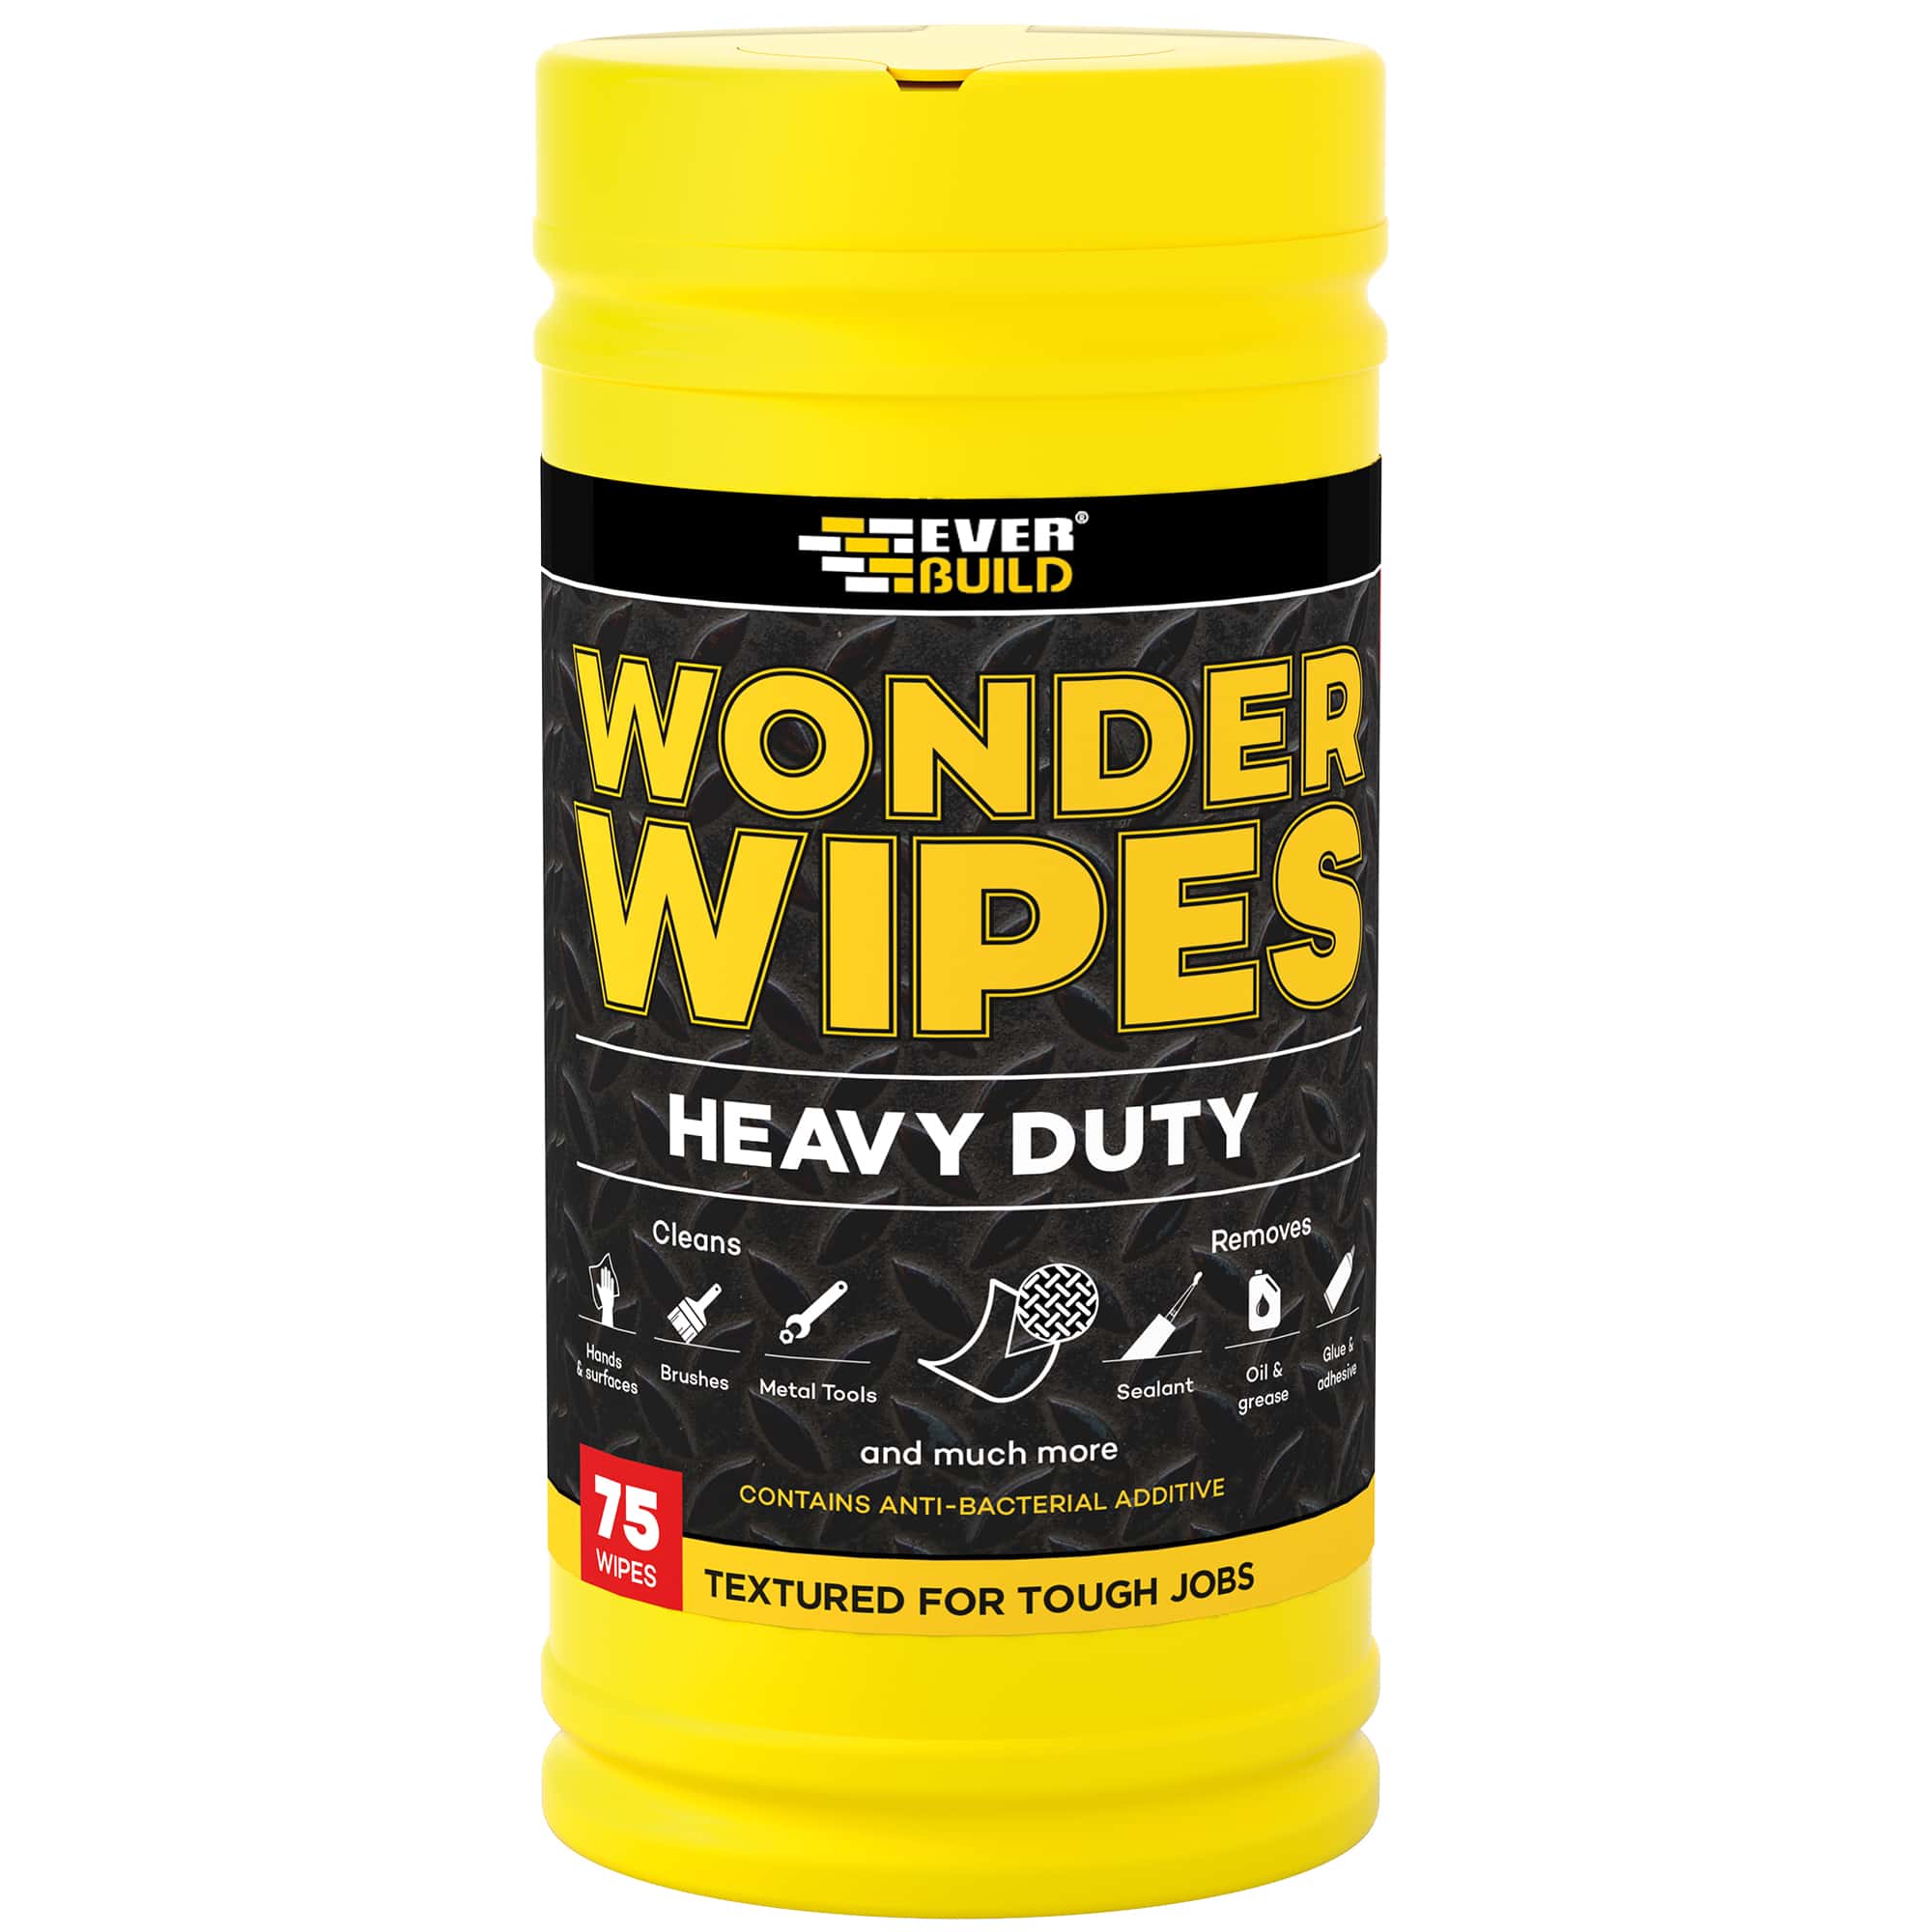 everbuild wonder wipes wet clean heavy duty tool sealant oil grease adhesive tub